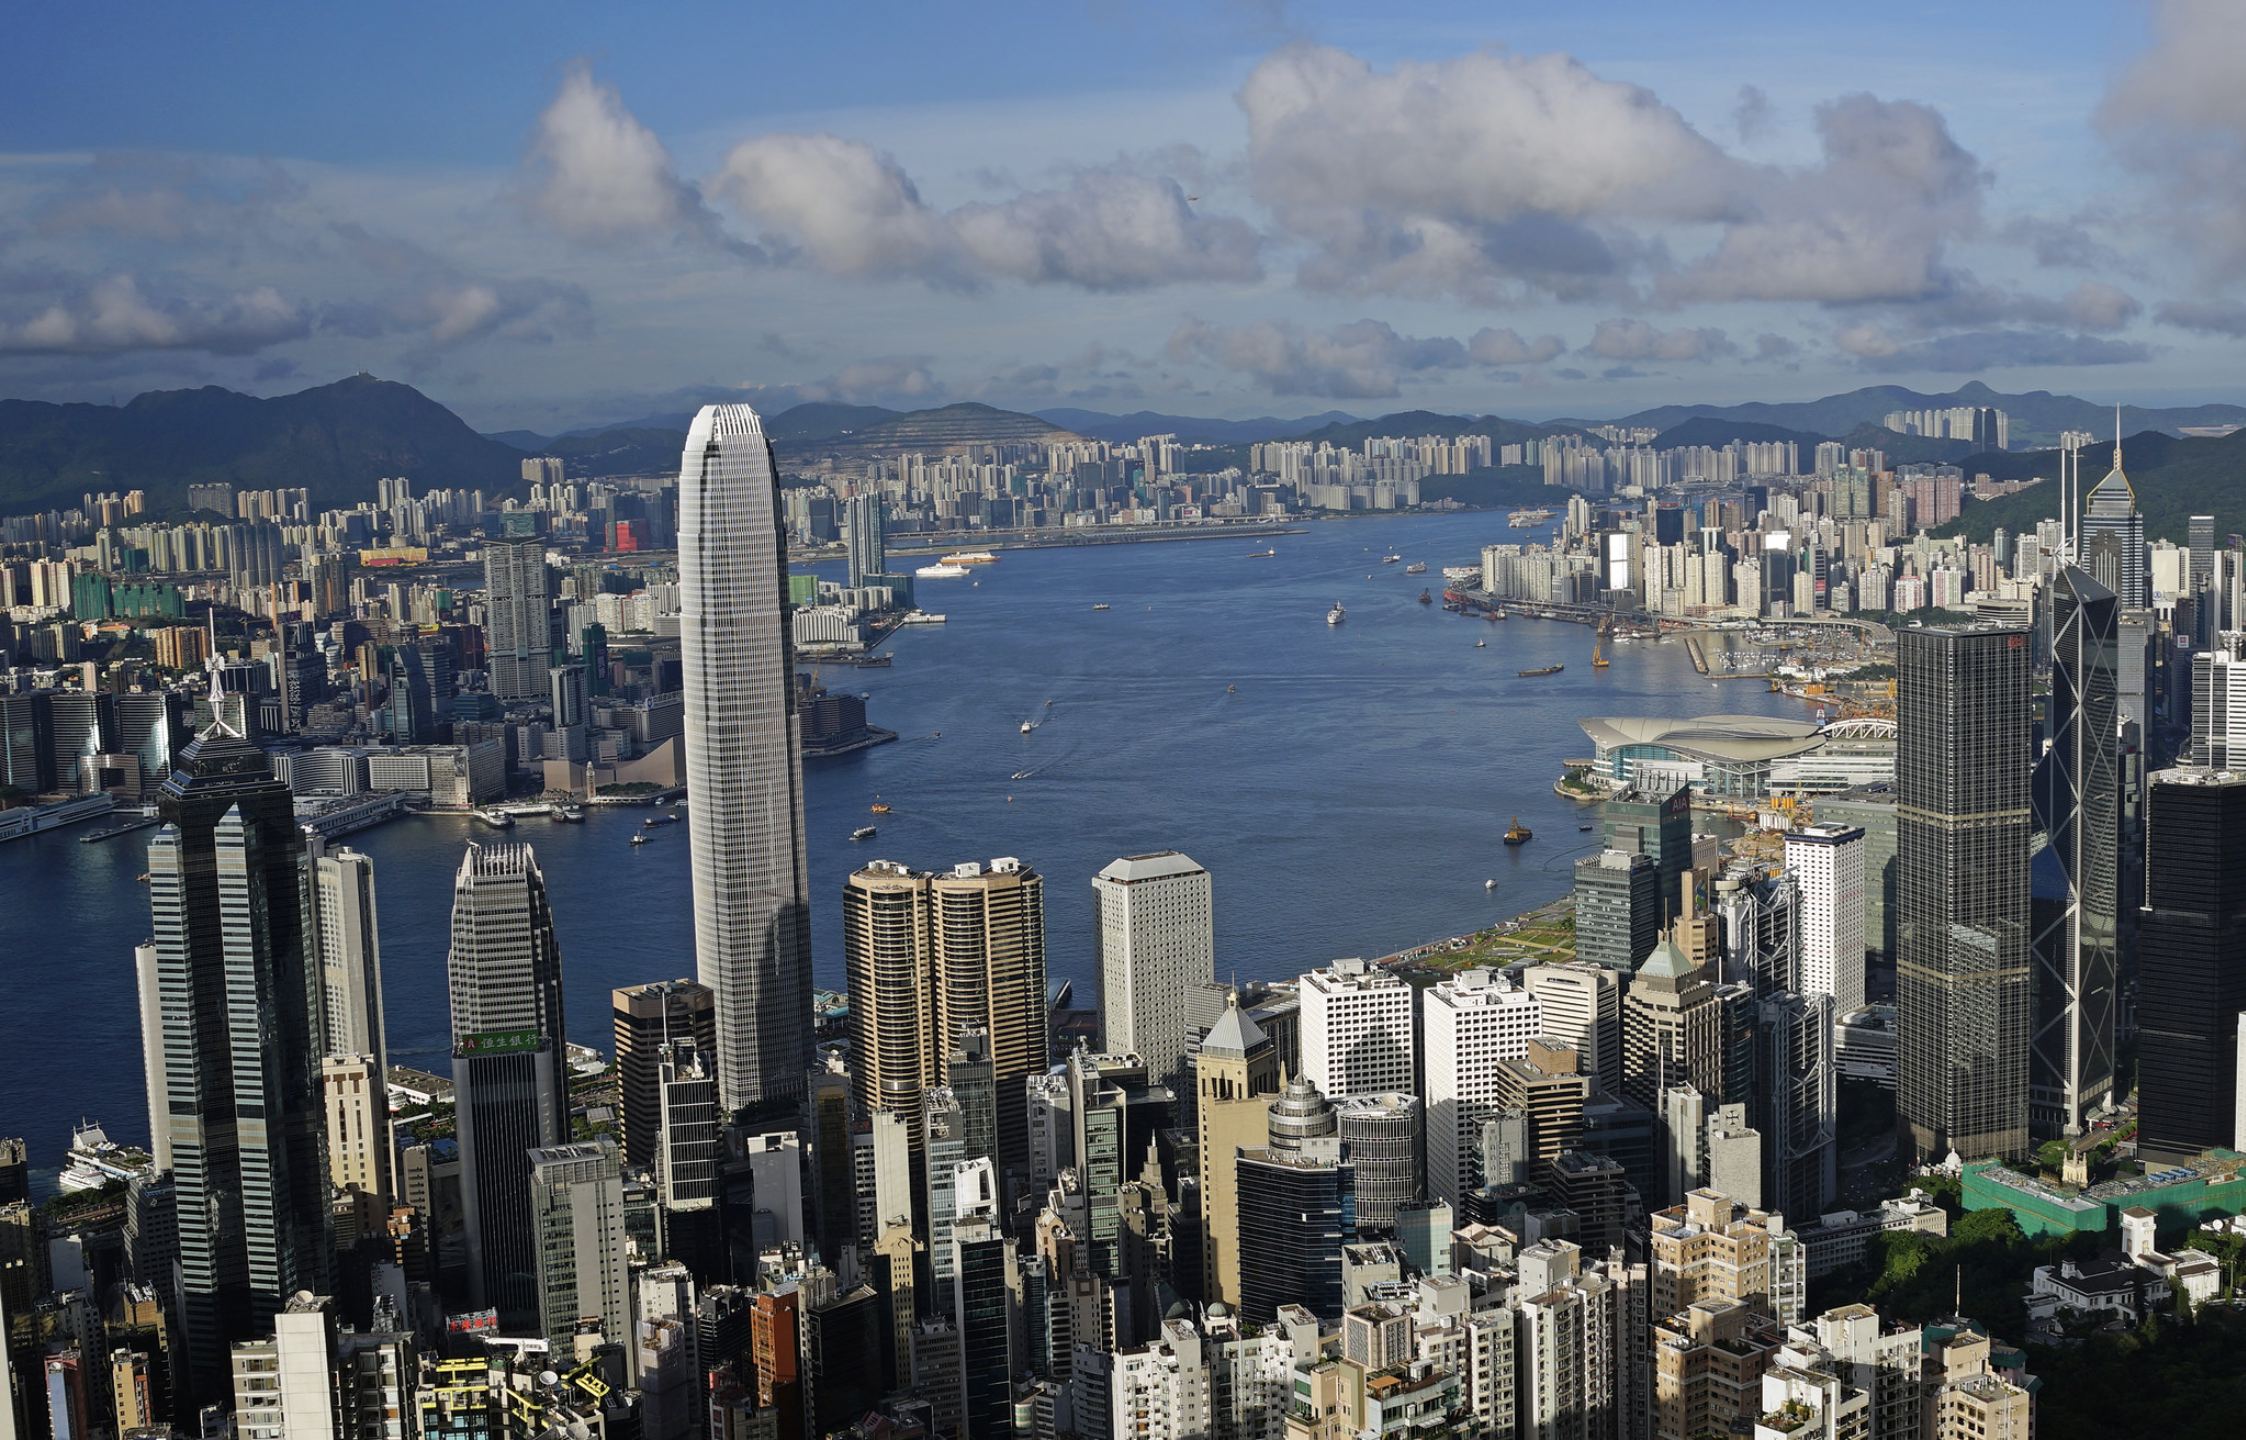 take a private tour with us and get our top tips on the best view from Victoria Peak.